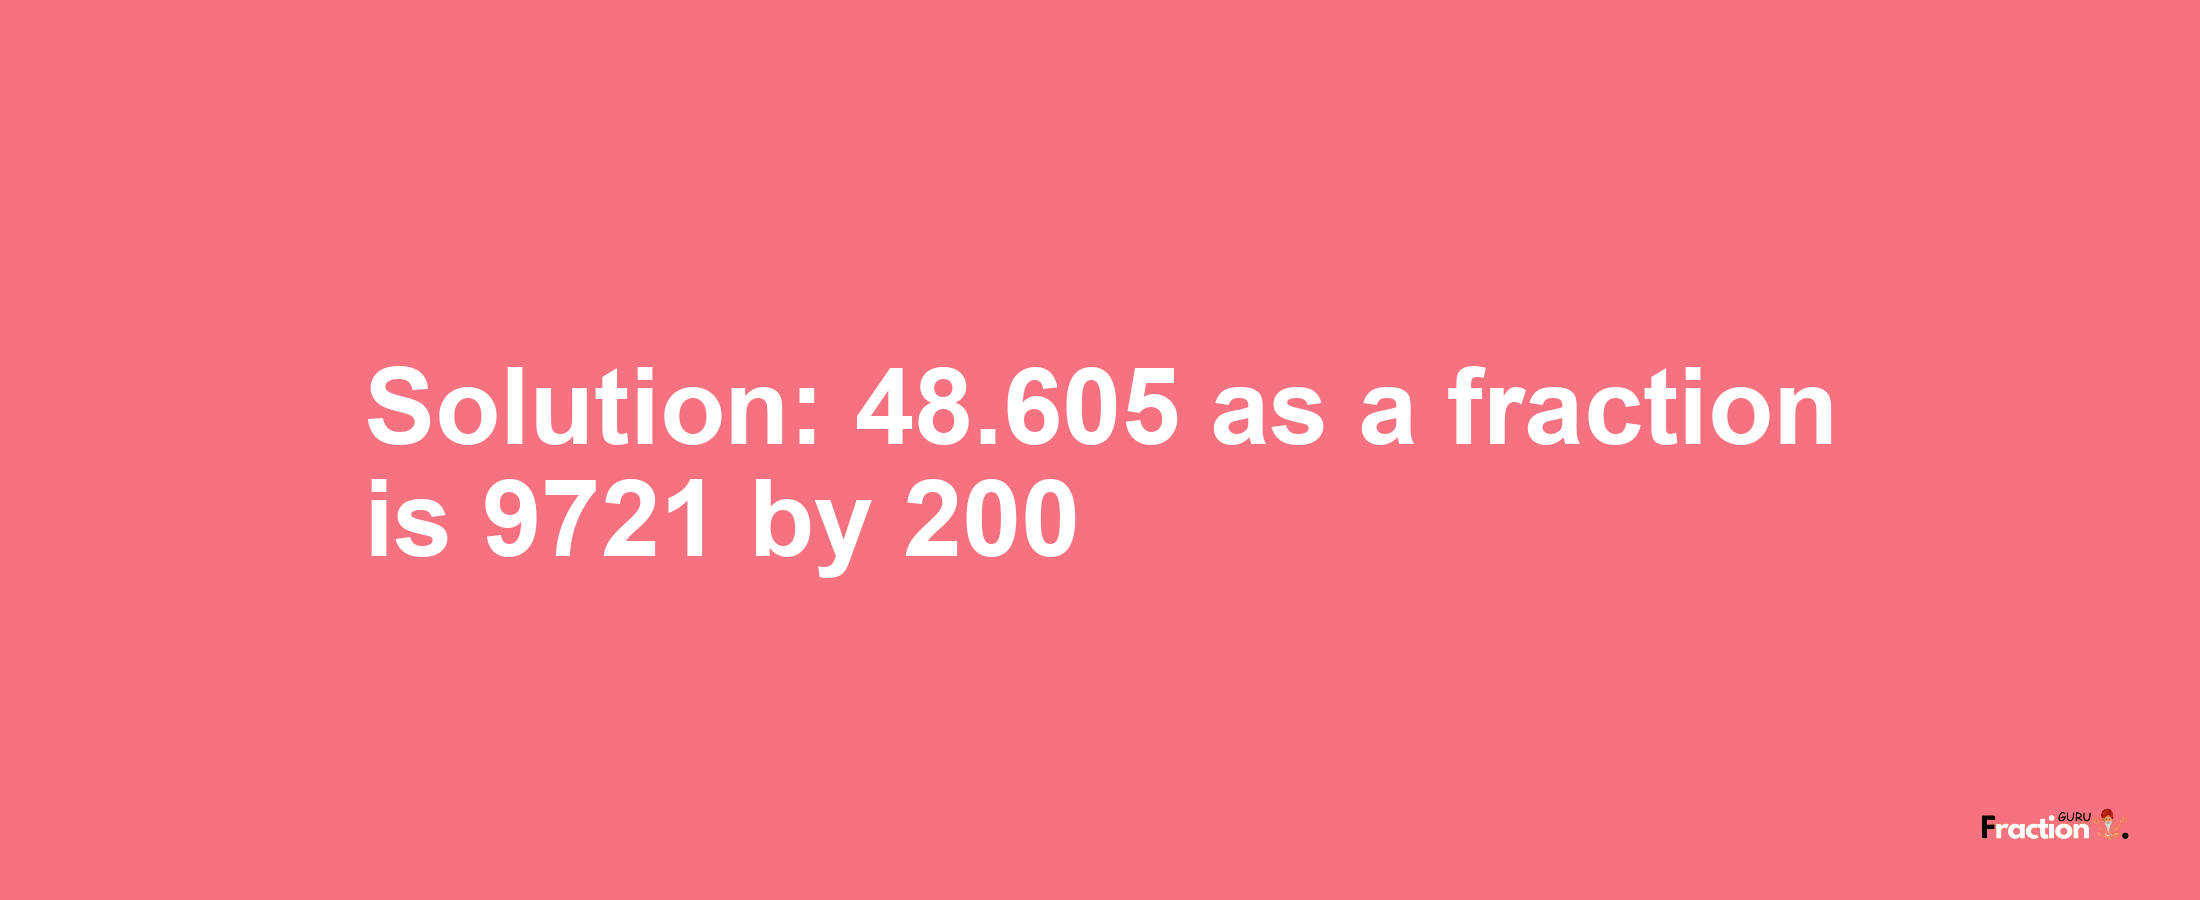 Solution:48.605 as a fraction is 9721/200